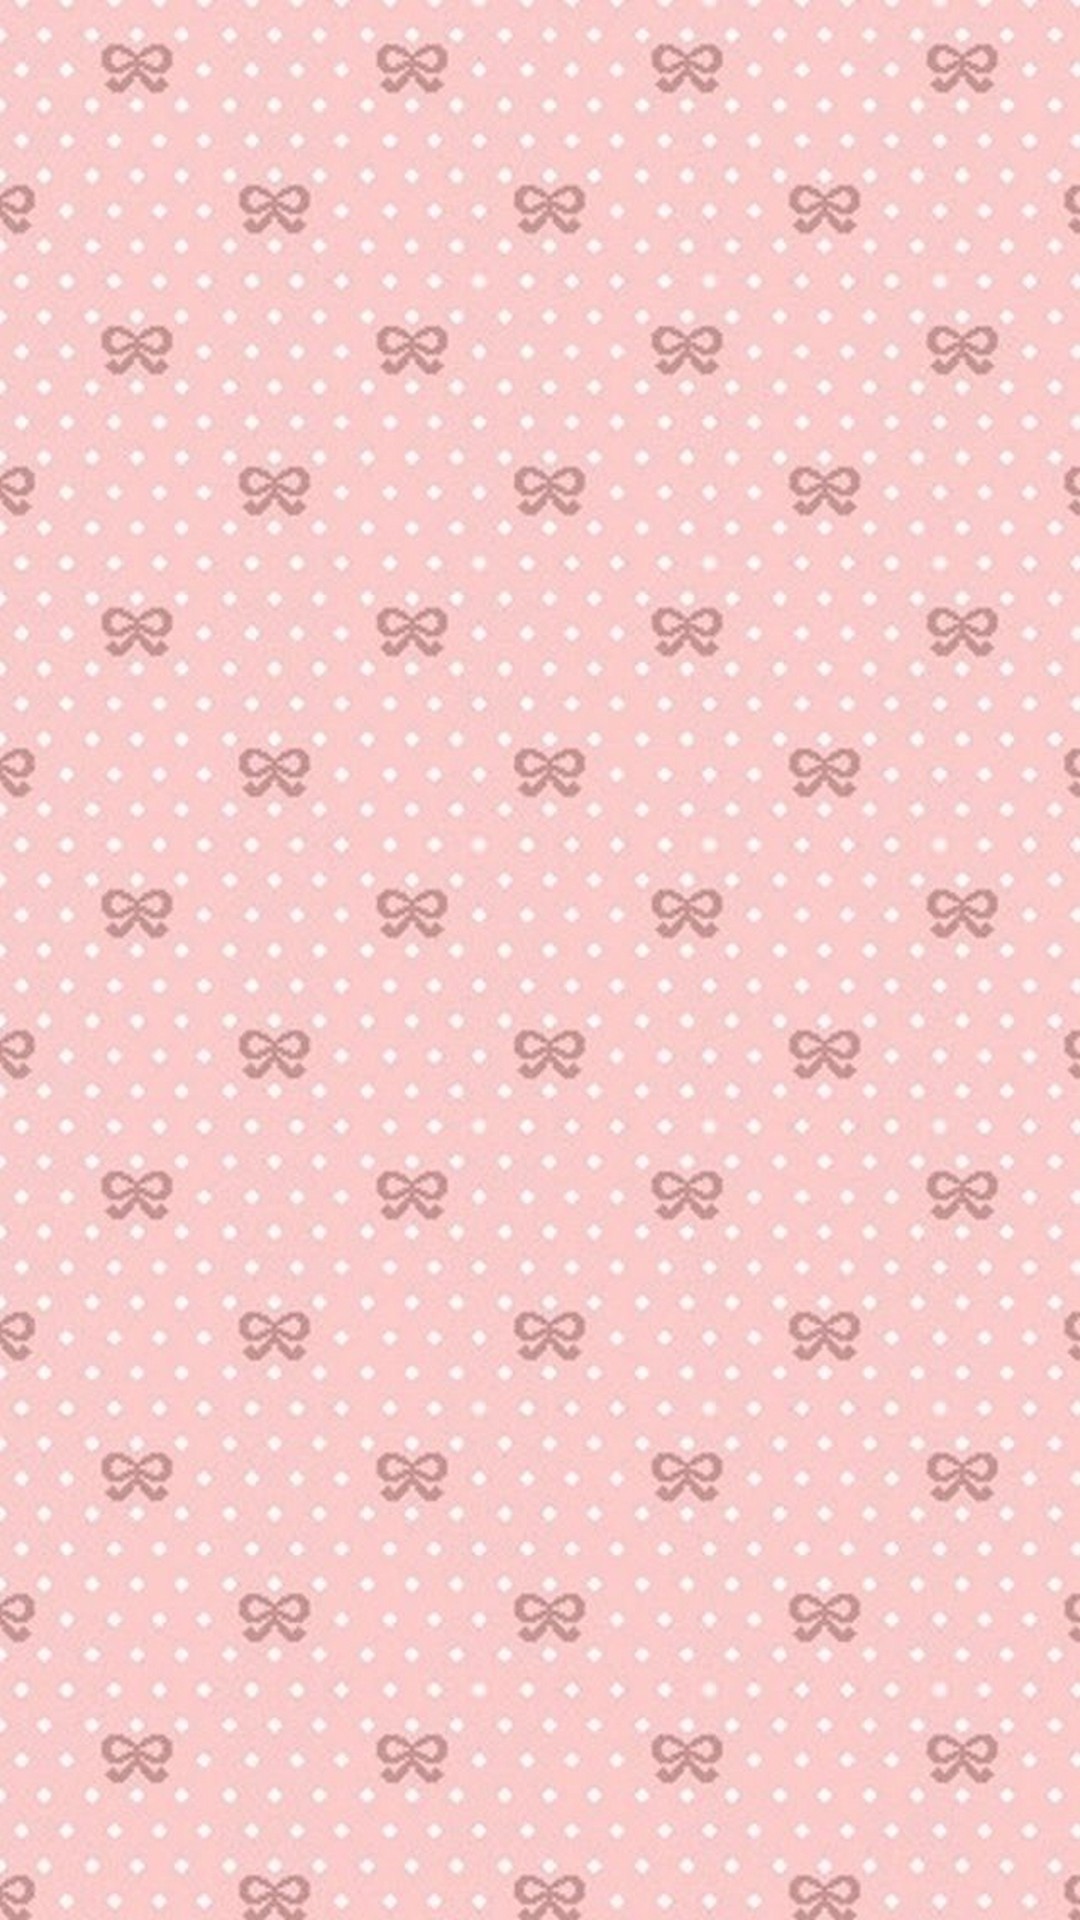 Pink Wallpaper Cute Girly For Android 1080x1920